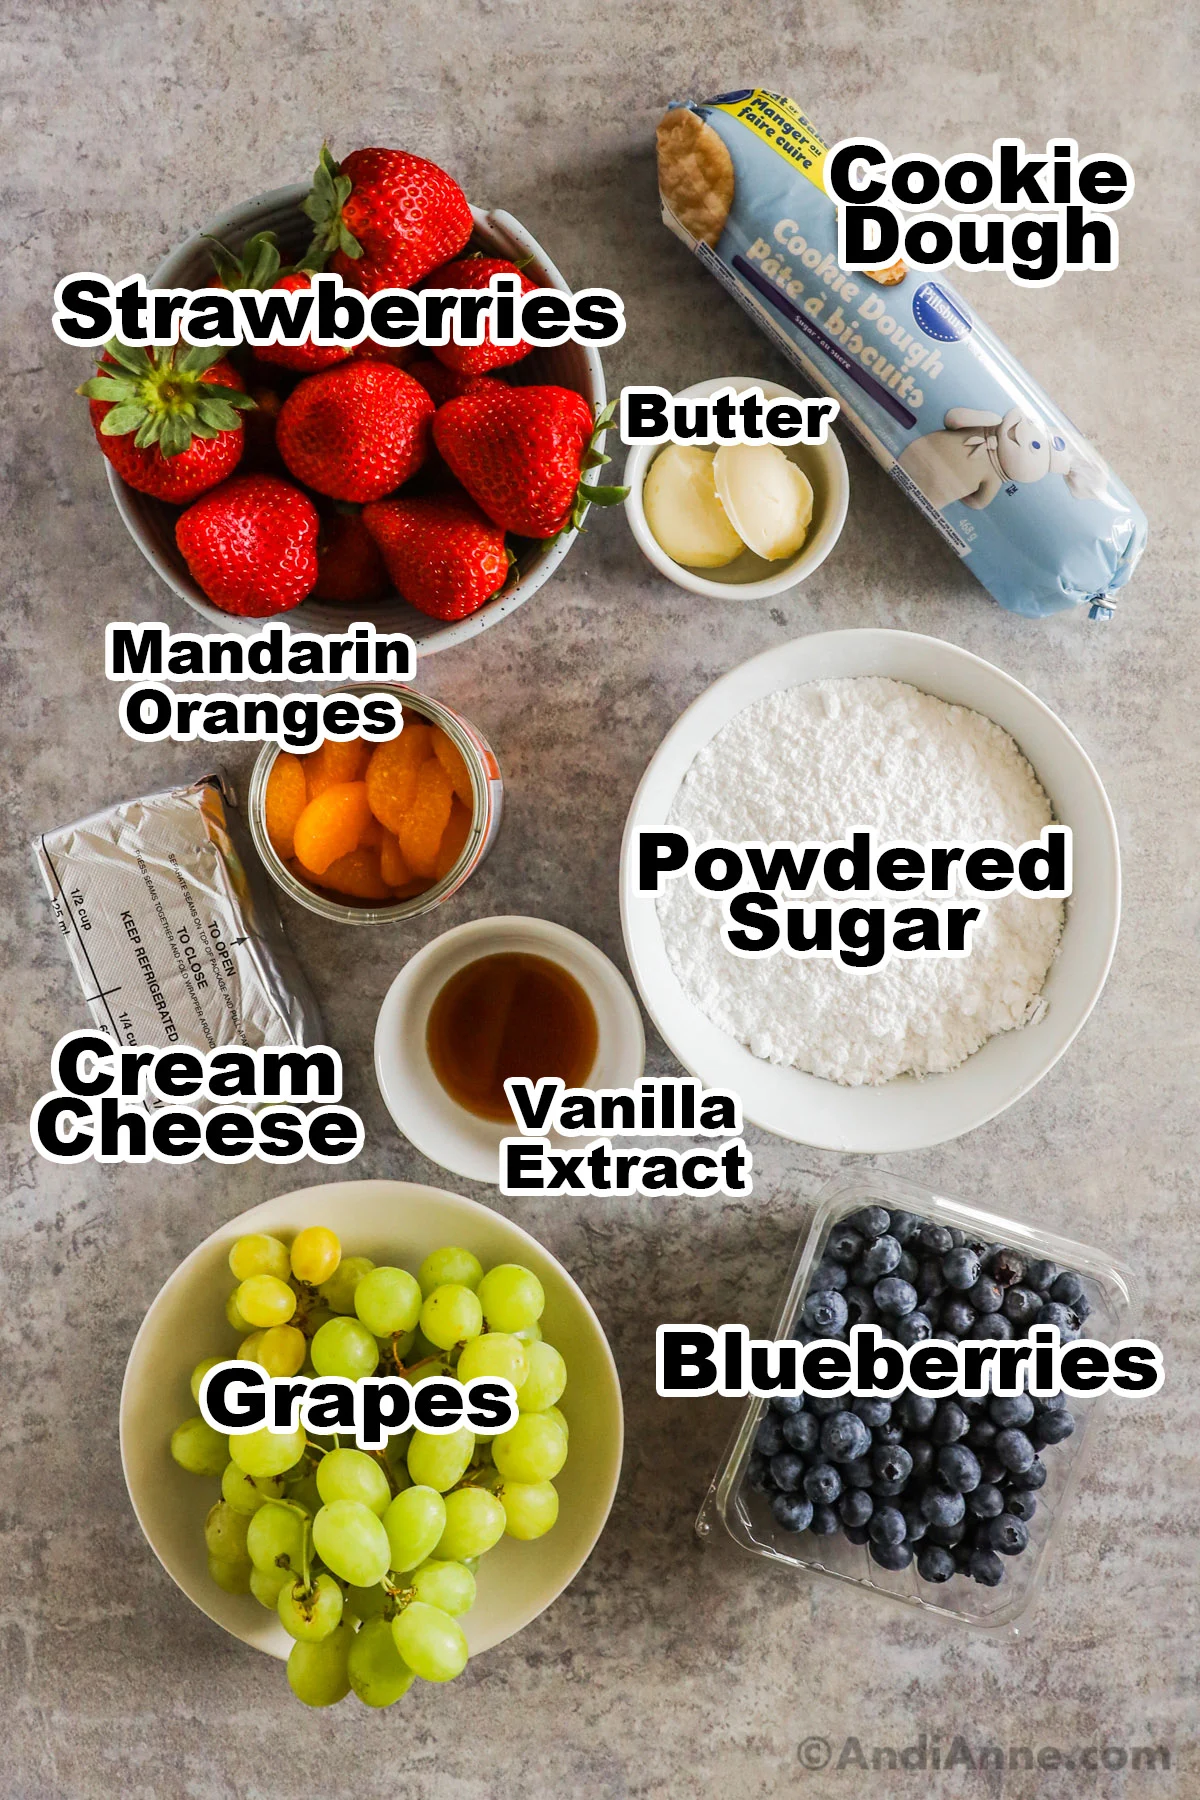 Recipe ingredients on the counter including bowls of fresh strawberries, grapes, blueberries, some cream cheese, refrigerated cookie dough, powdered sugar and vanilla extract.